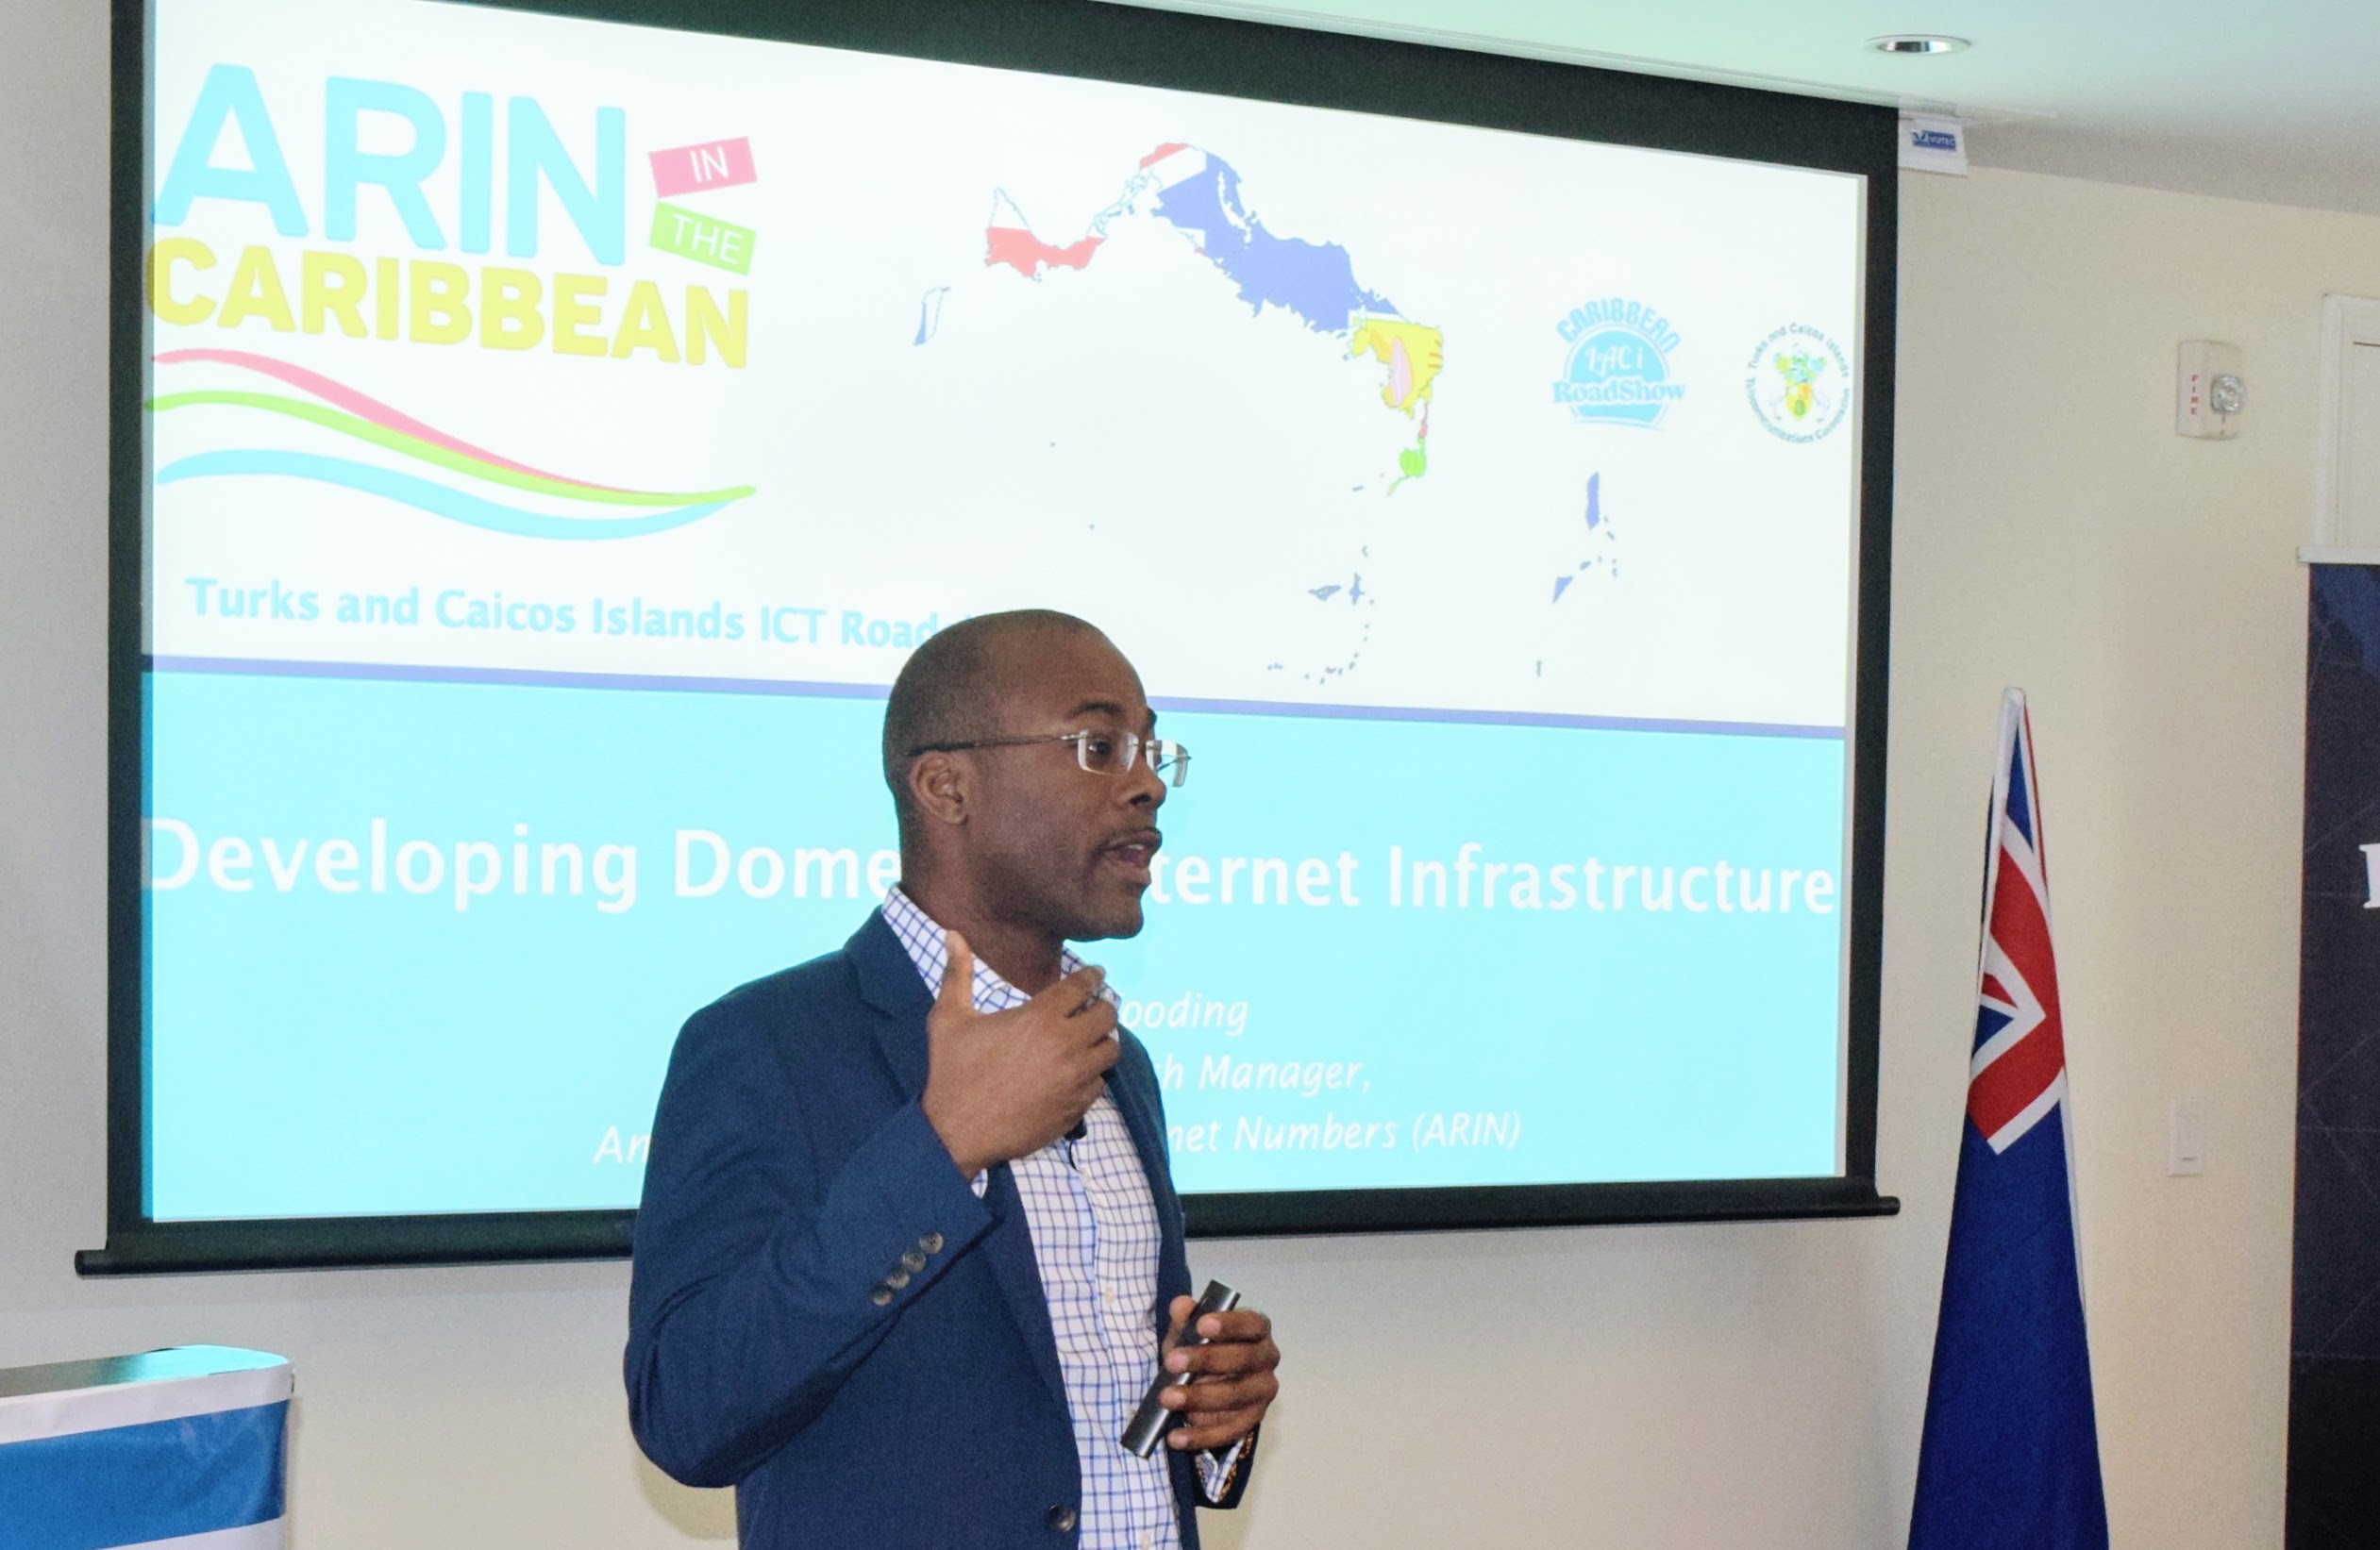 Bevil Wooding presenting at Turks and Caicos Islands ICT Roadshow